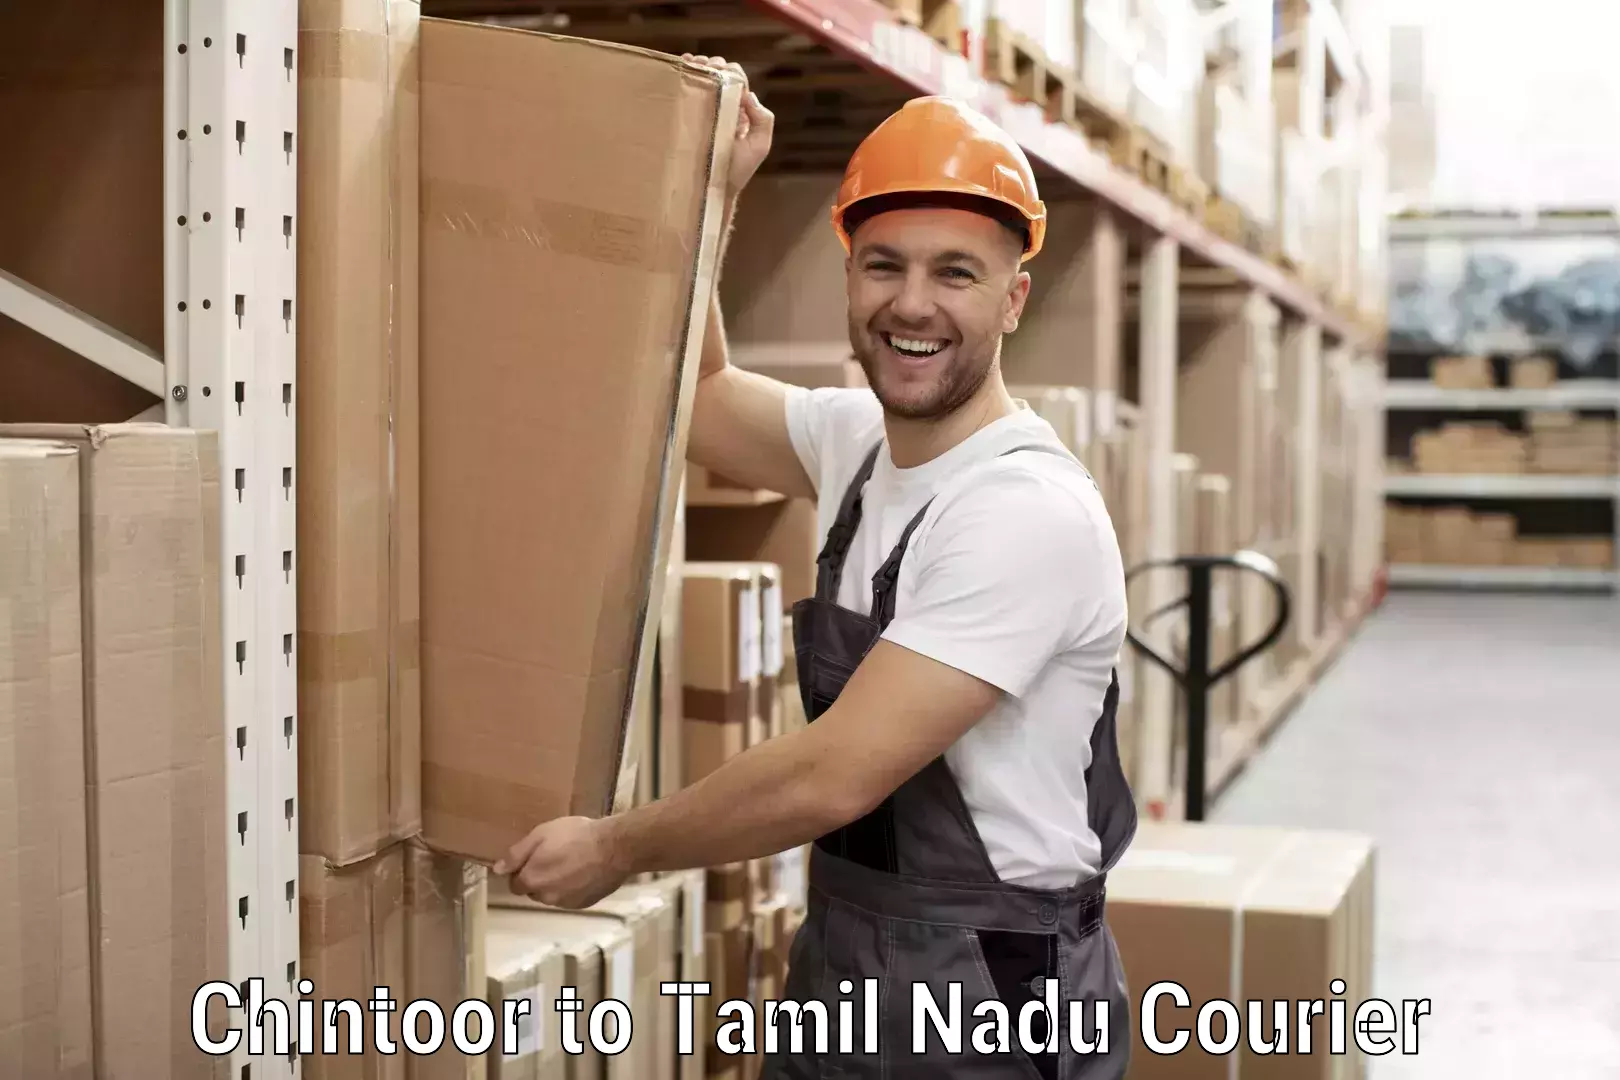 Courier service booking Chintoor to Ayyampettai